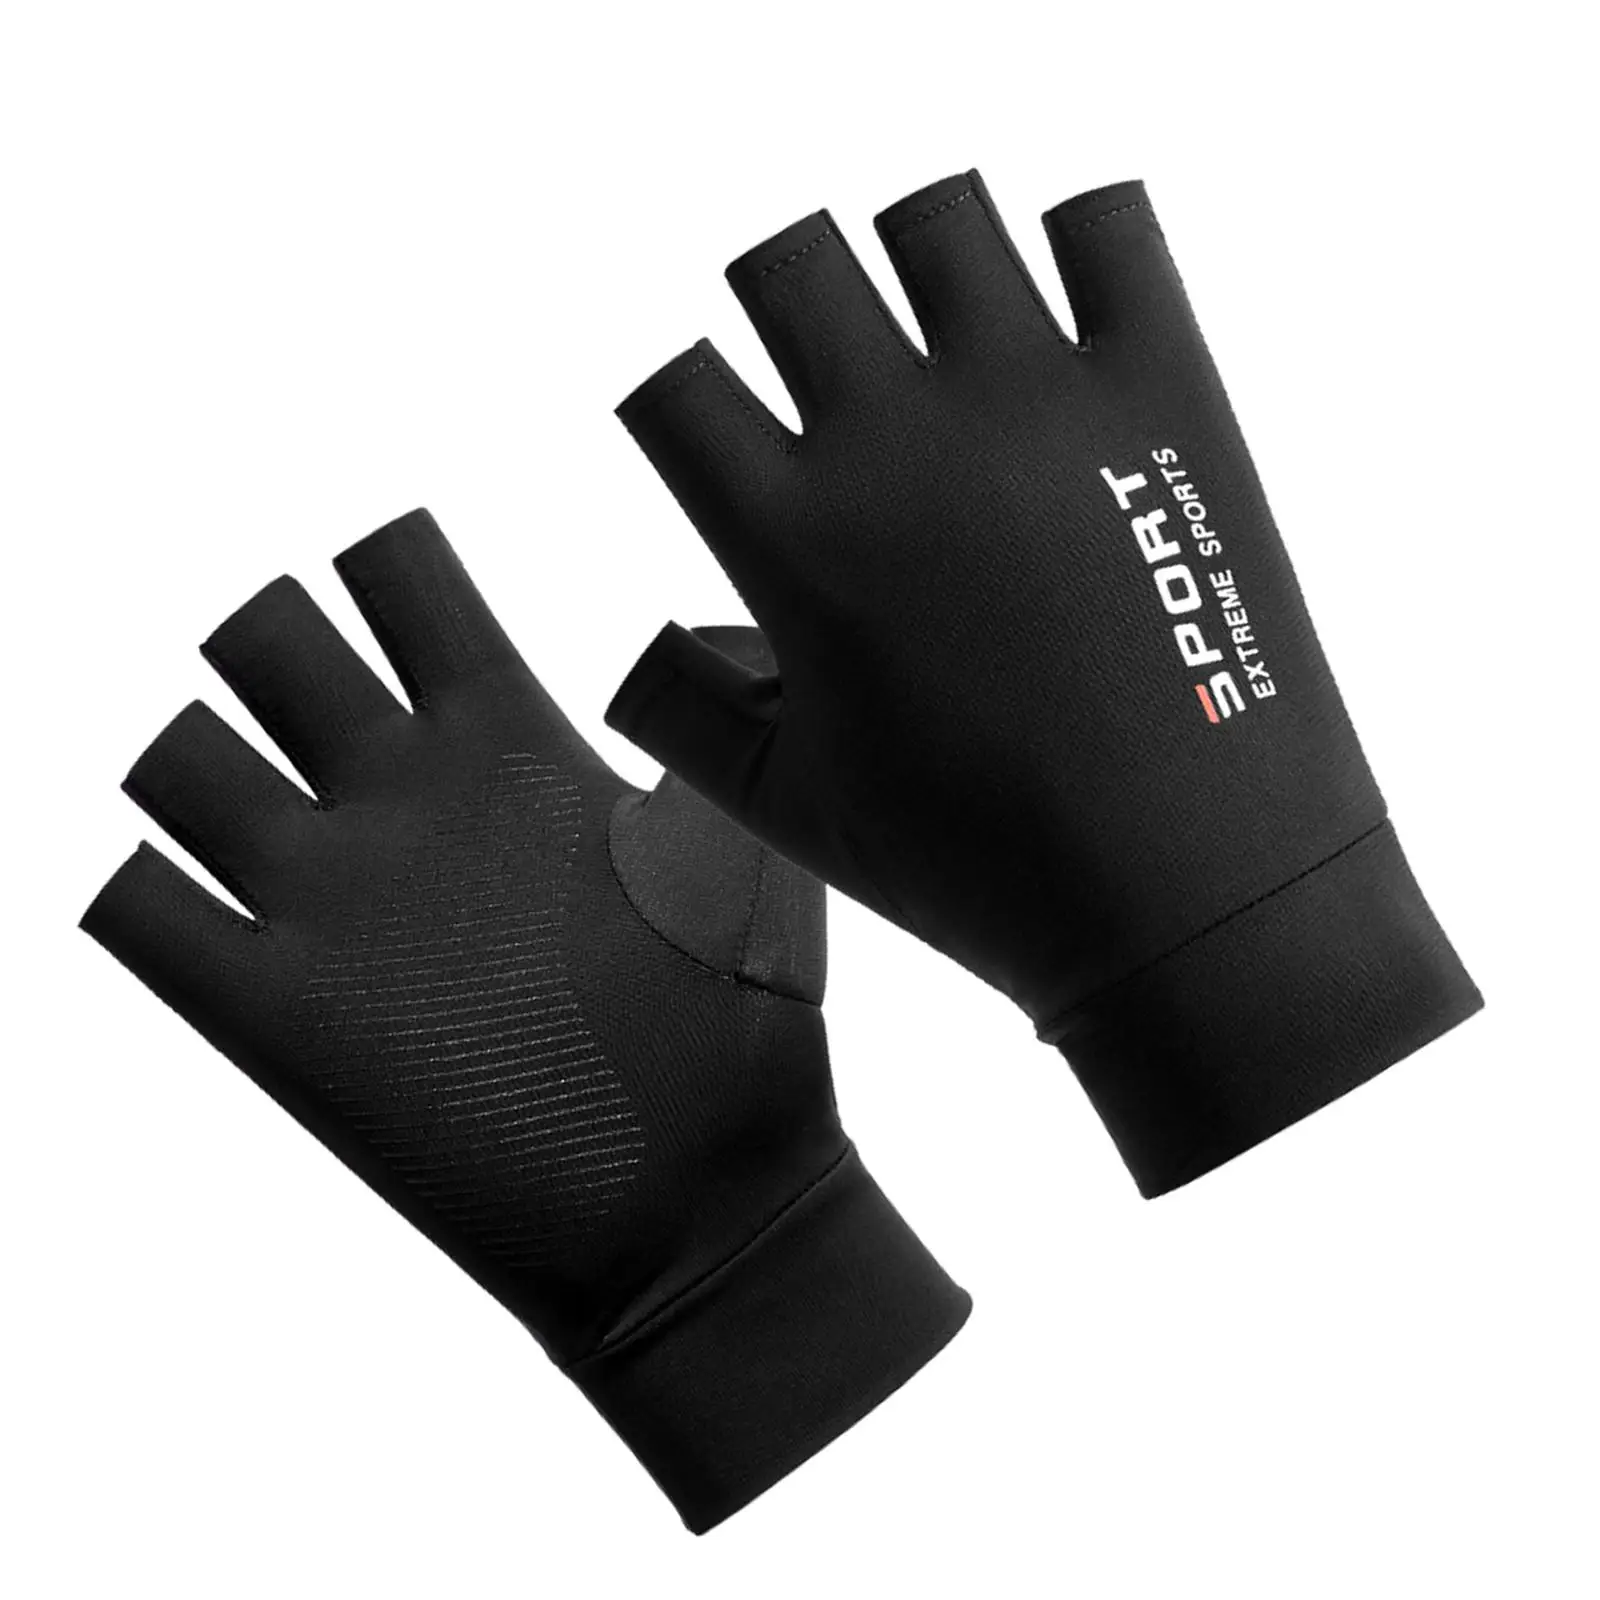 Summer Ice Silk Gloves Sun Protection Shockproof Mittens Workout Gloves Non Slip for Running Fishing Hiking Motorcycle Driving